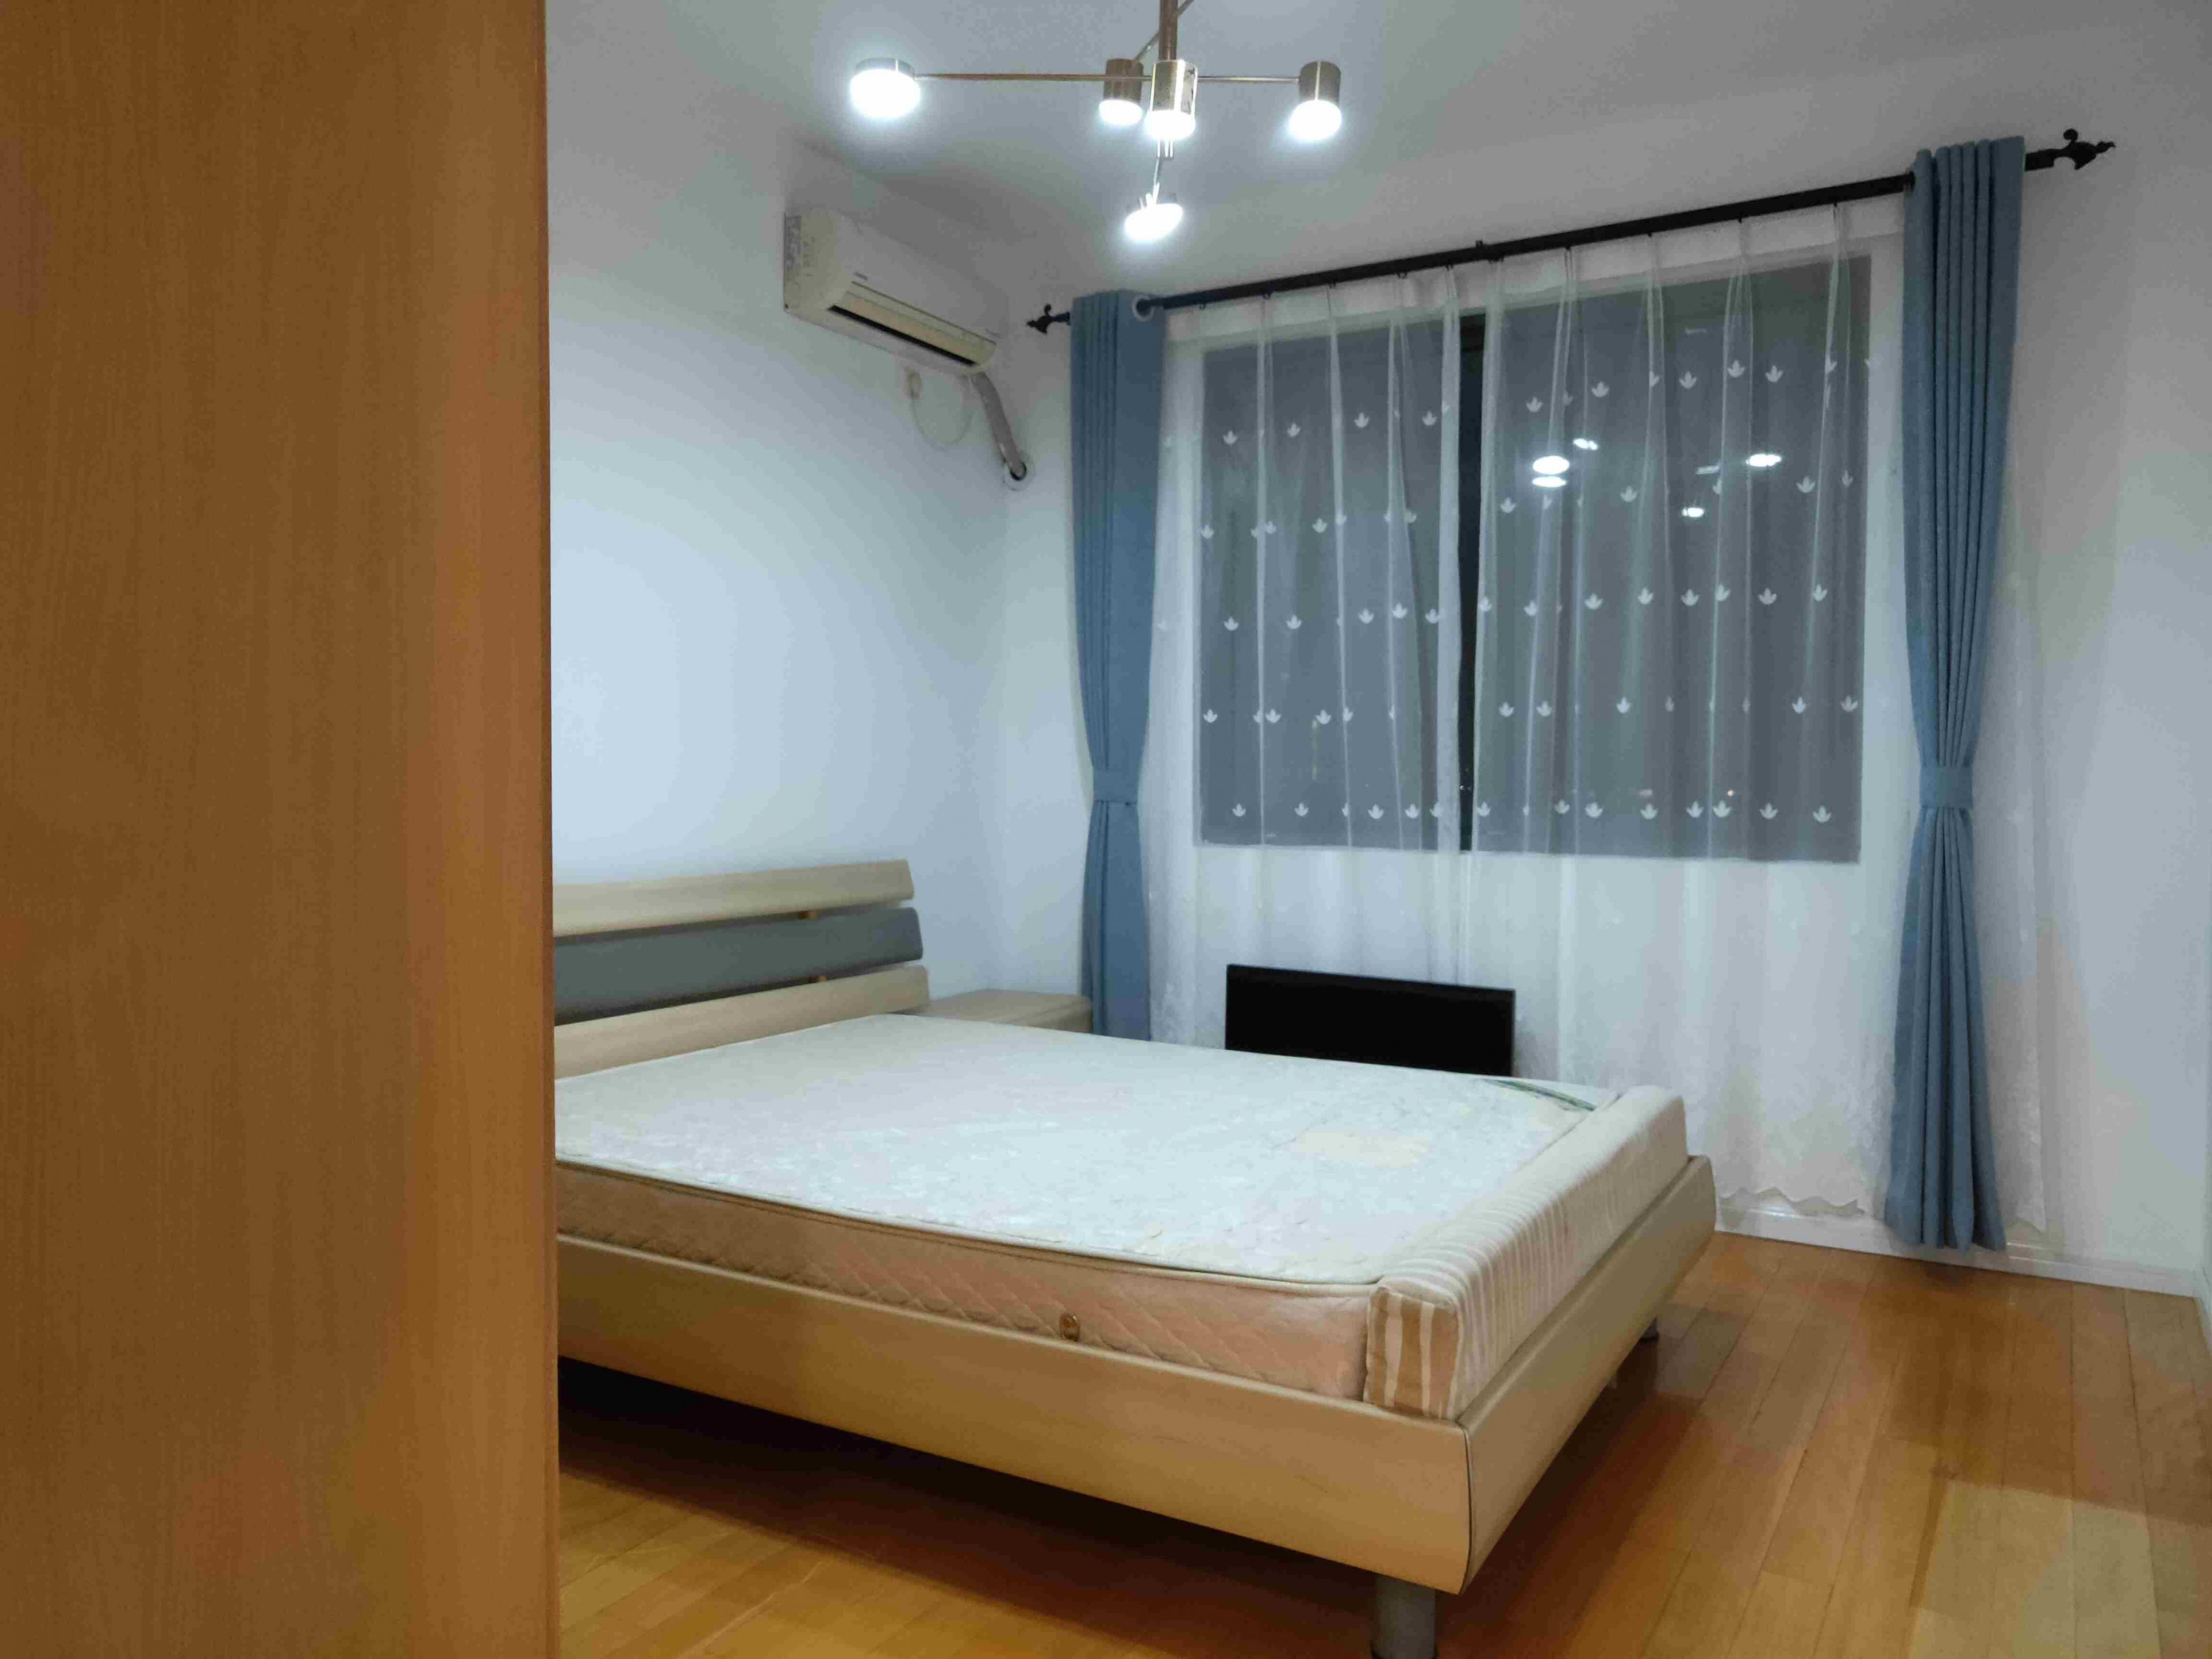 badroom Spacious Affordable 3BR Apt nr River & LN 3/11/12 for Rent in Shanghai